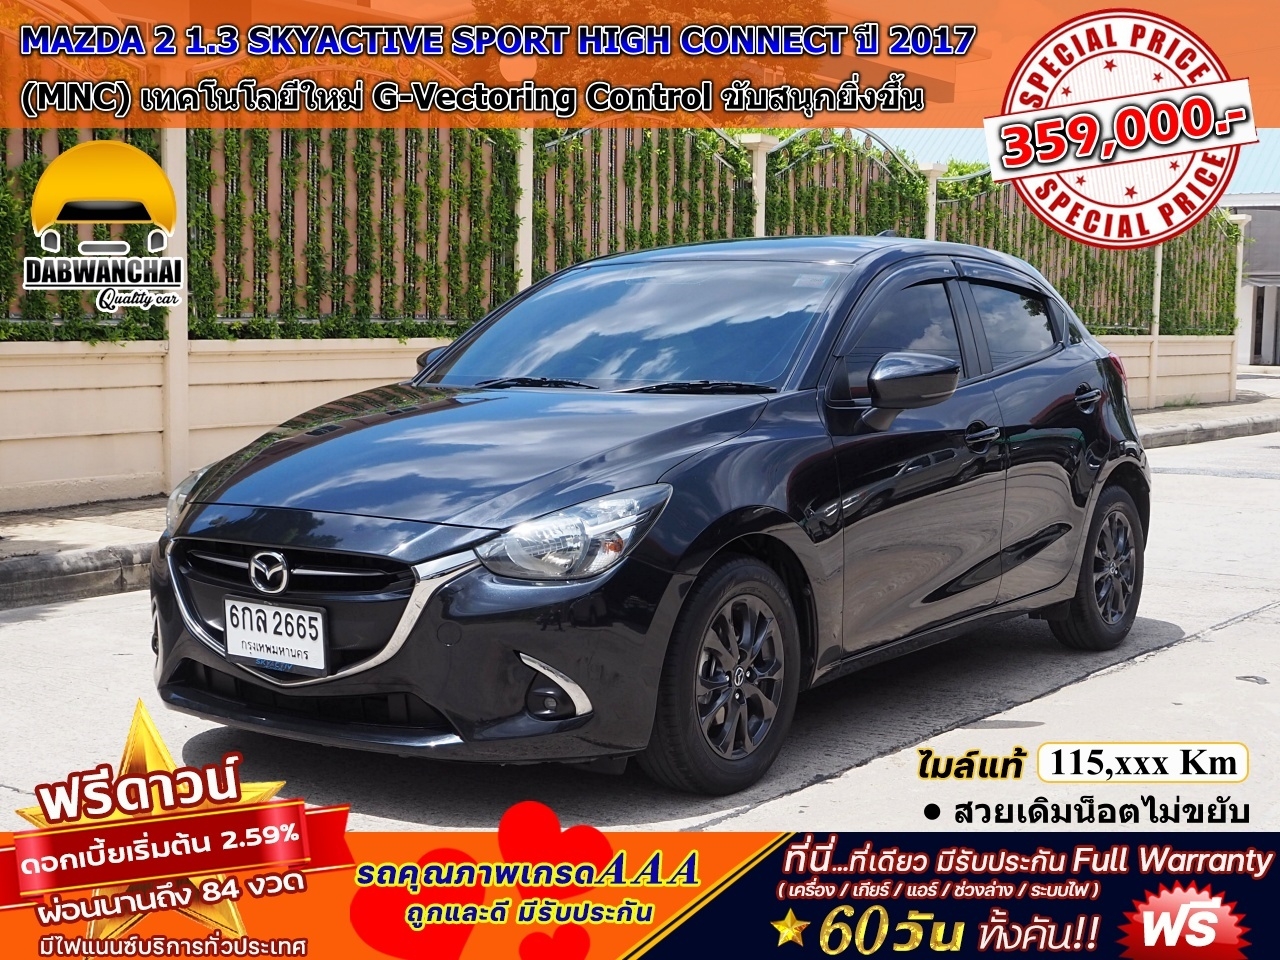 MAZDA 2 1.3 SKYACTIVE SPORT HIGH CONNECT (MNC)  ปี 2017 รูปที่ 1